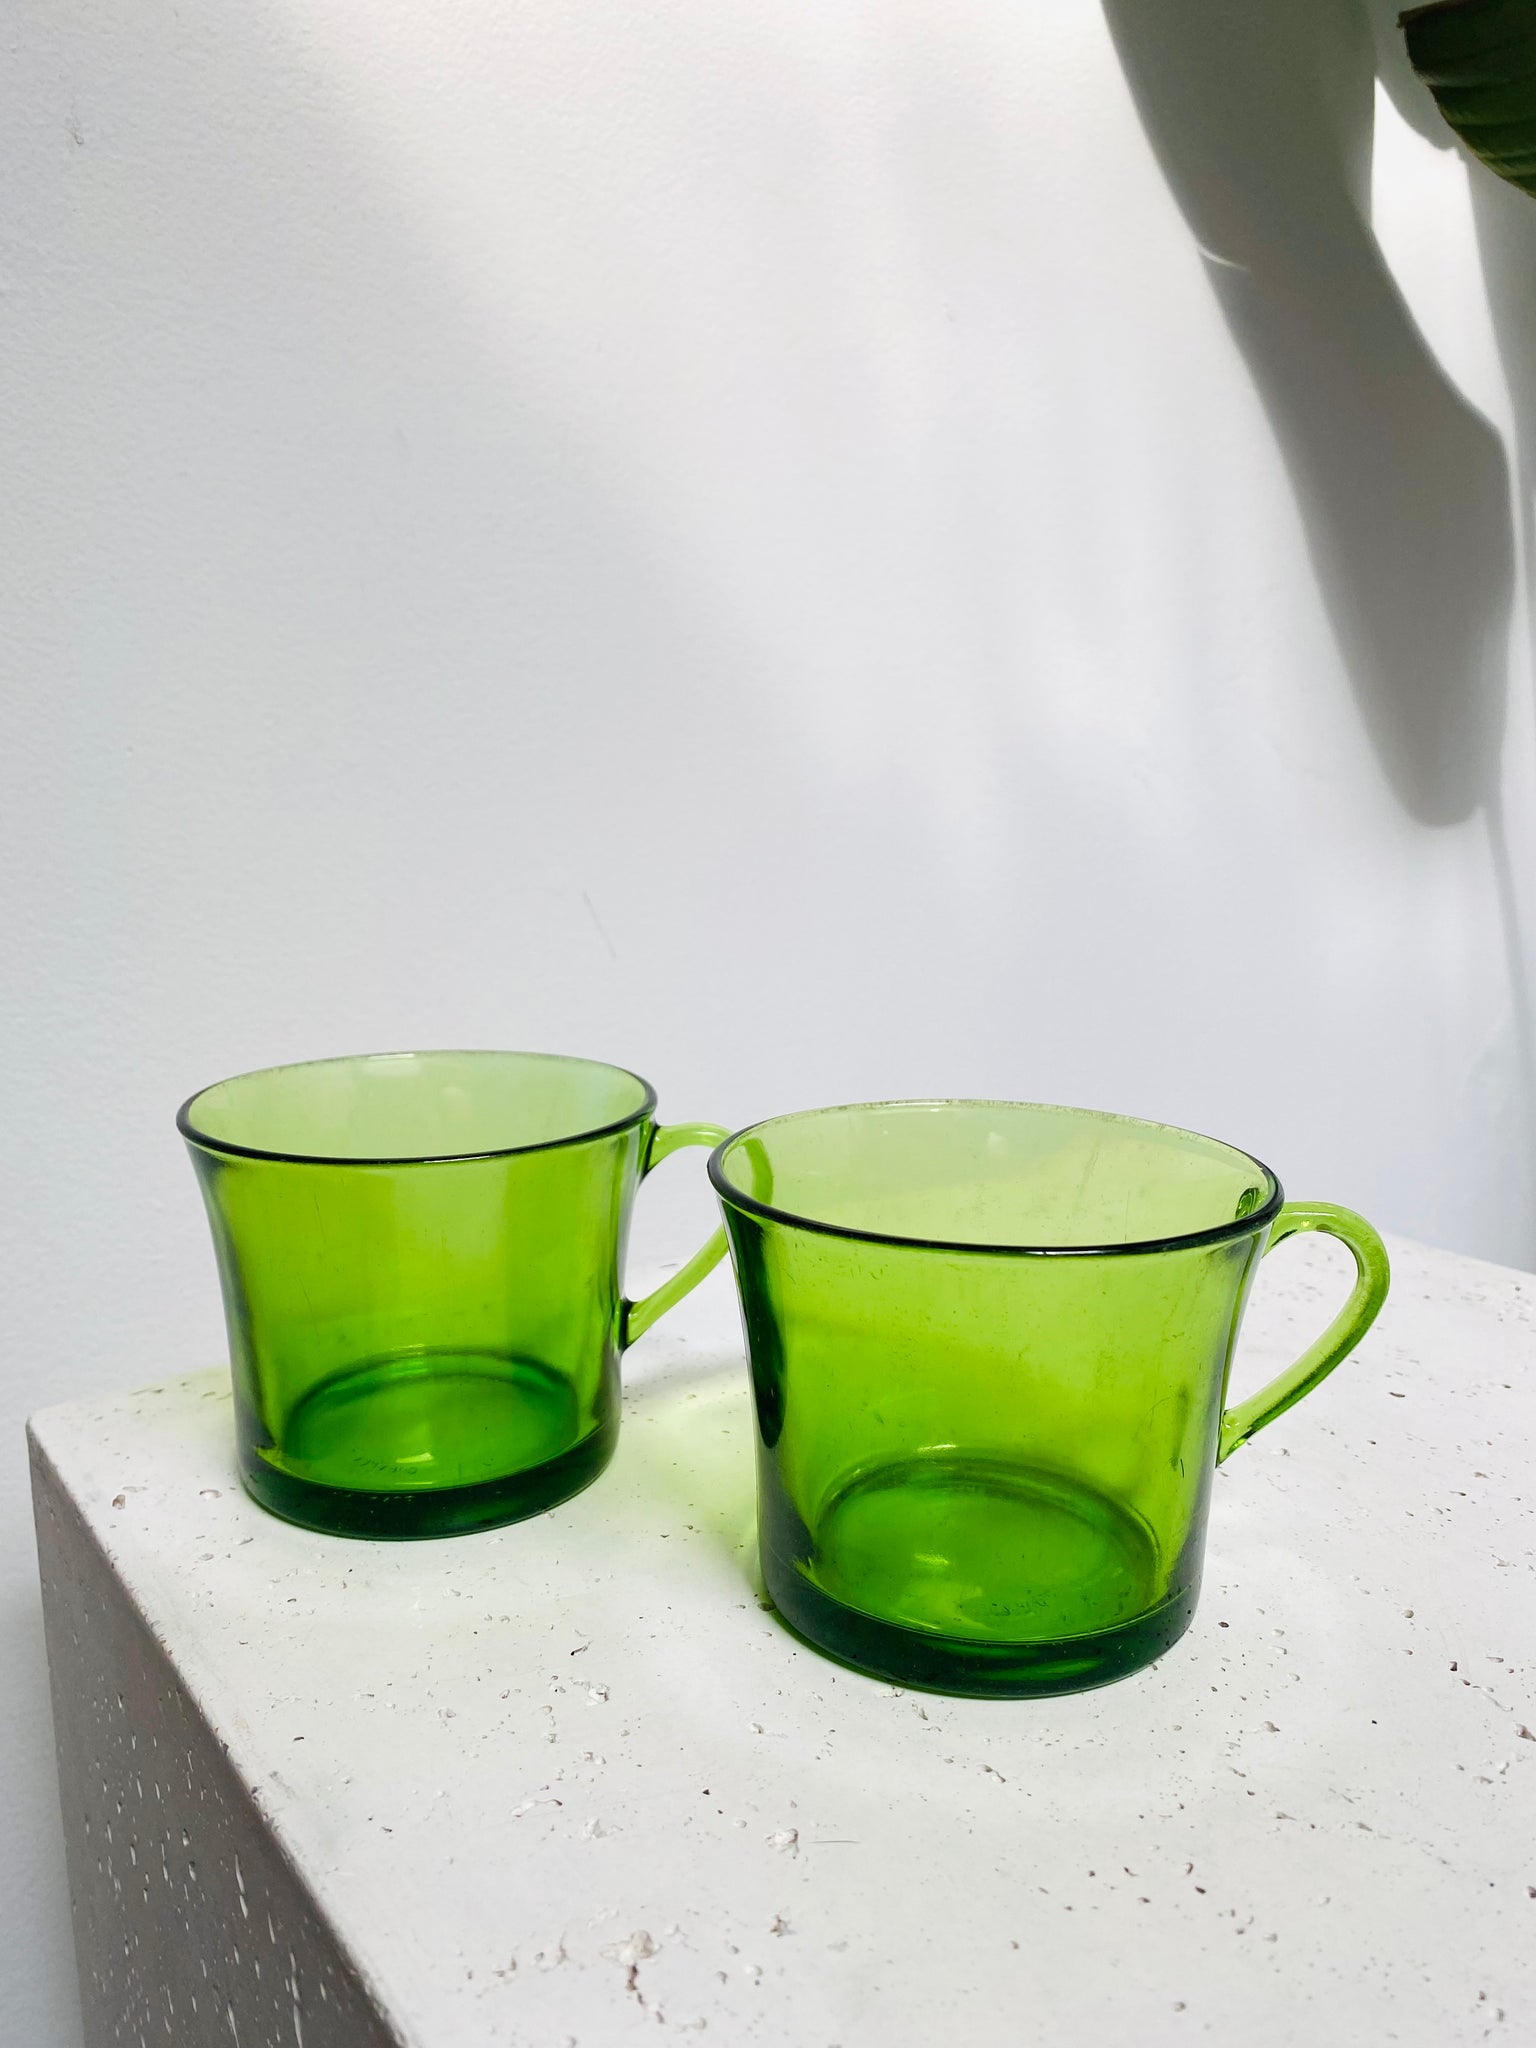 Set of 2 Arcoroc emerald green mugs made in France